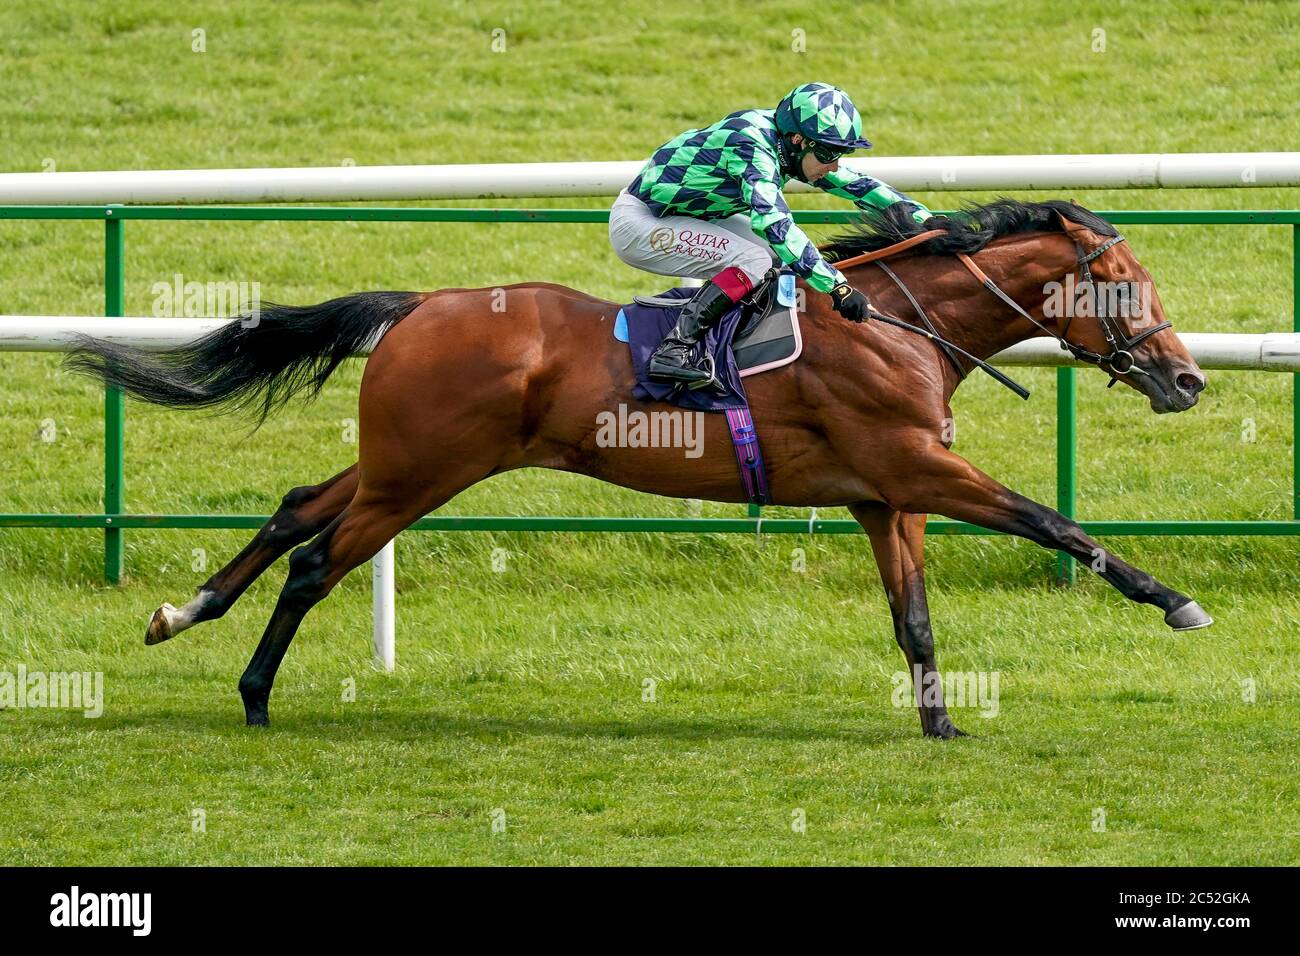 Oisin Murphy riding Matthew Flinders win The Follow At The Races On Twitter Novice Stakes (Div 1) at Doncaster Racecourse at Doncaster Racecourse. Stock Photo